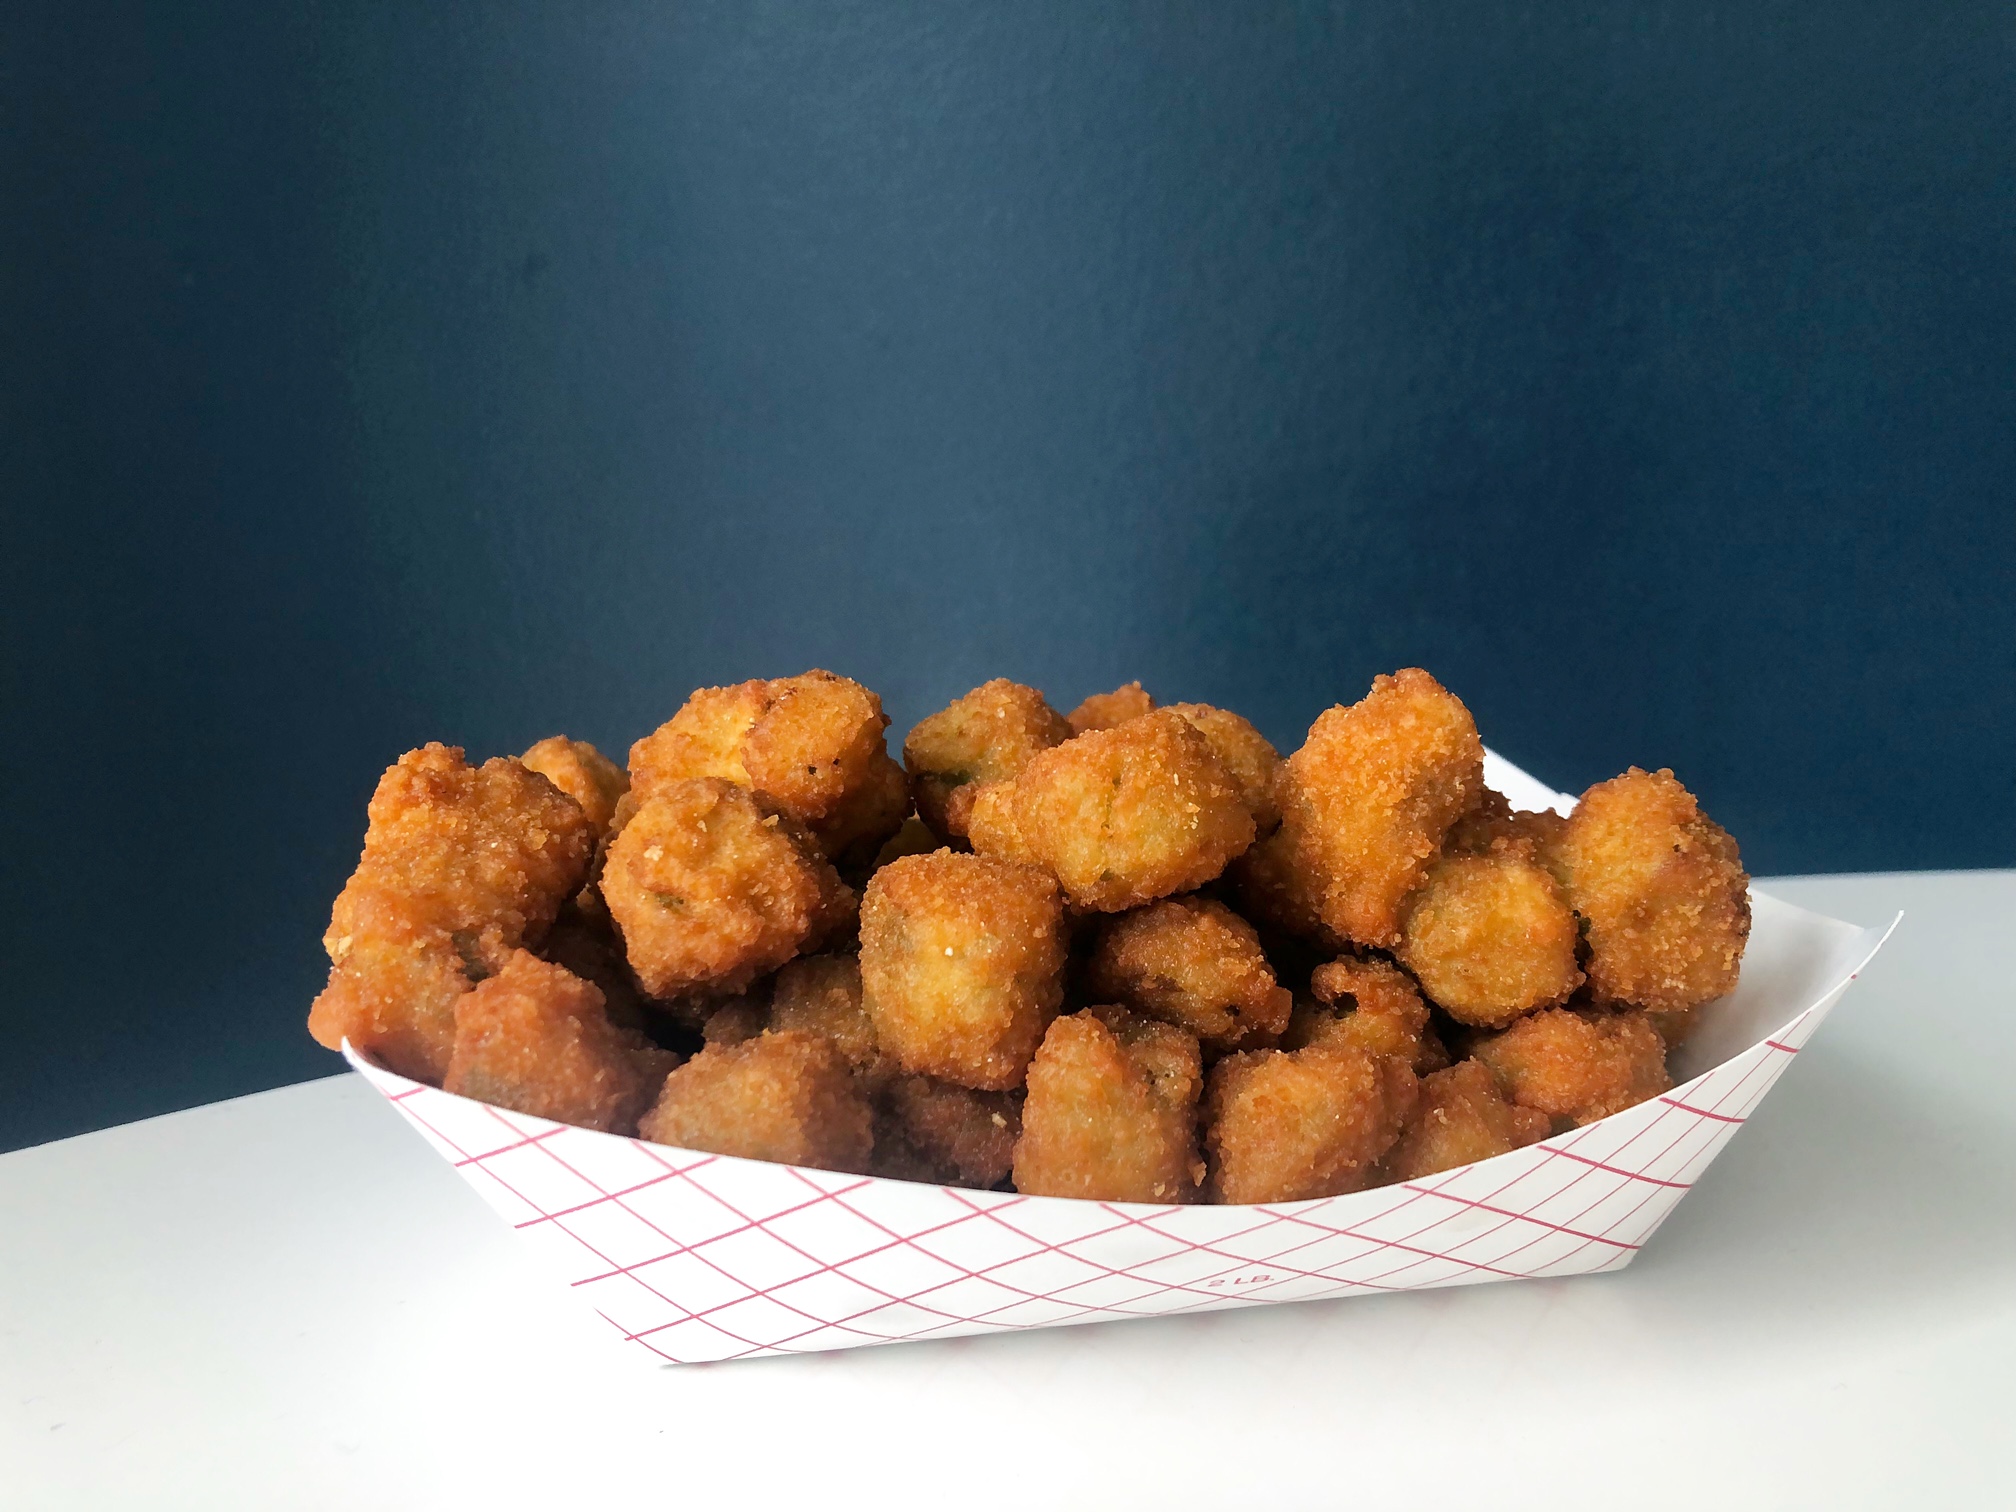 A paper basket of fried okra sits on a white table in front of a blue wall. Photo by Alyssa Buckley.